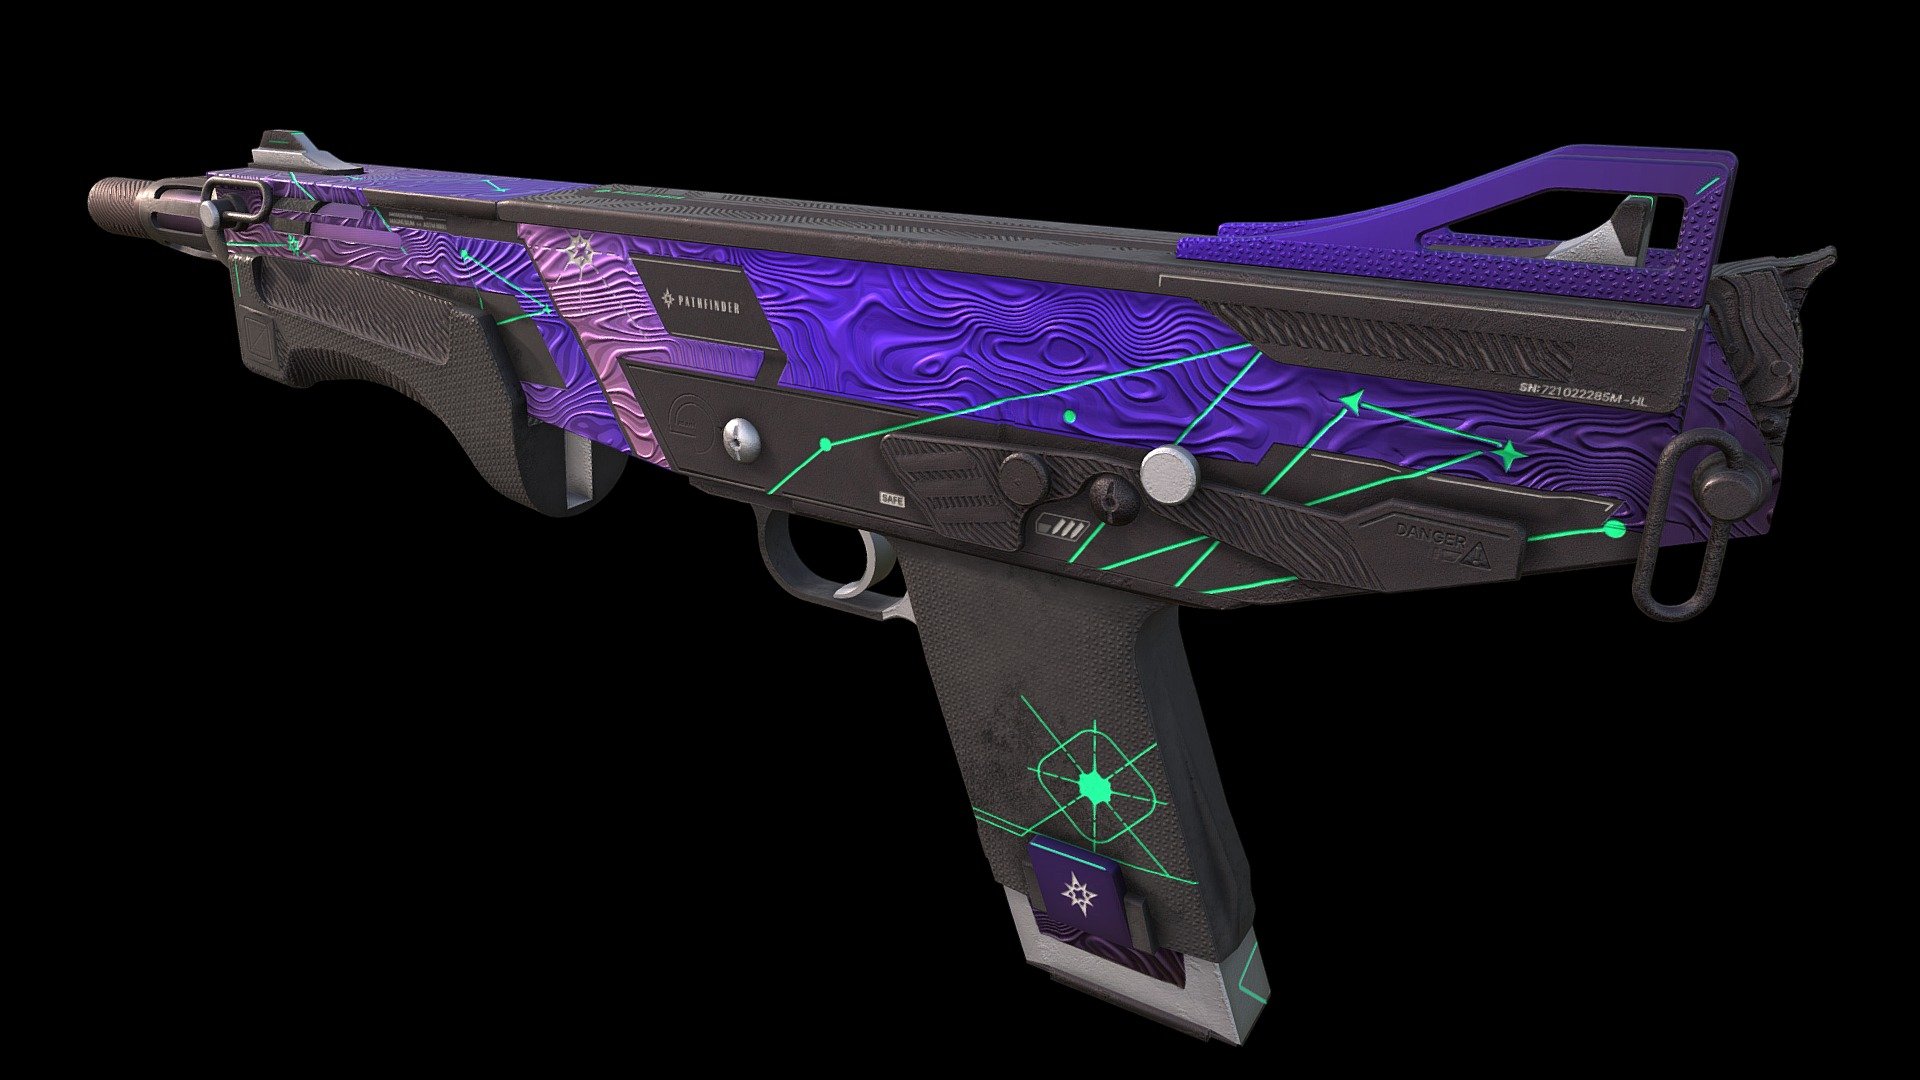 Concept texture/skin for Counter Strike 2 If you want to see my work ingame., vote for my workshop submissions here: https://steamcommunity.com/id/tanapta/myworkshopfiles/



This work includes complete texture/material set on a predefined ingame model.

My focus was and always will be to create medium-tier weapon skins, that are relatively neutral and not overly complicated. I know there are so many superb artists that create a true pieces of Art - I’m just a humble ui/ux designer that puts his soul to create a niche of guns that fit my needs.

Like all of my work, I will adapt this style to various guns with changes and adjustments where it seems necessary (for example additional material because of model complexity etc).

Much love, Tanapta - MAG-7 - Pathfinder (CS2) - 3D model by tanapta 3d model